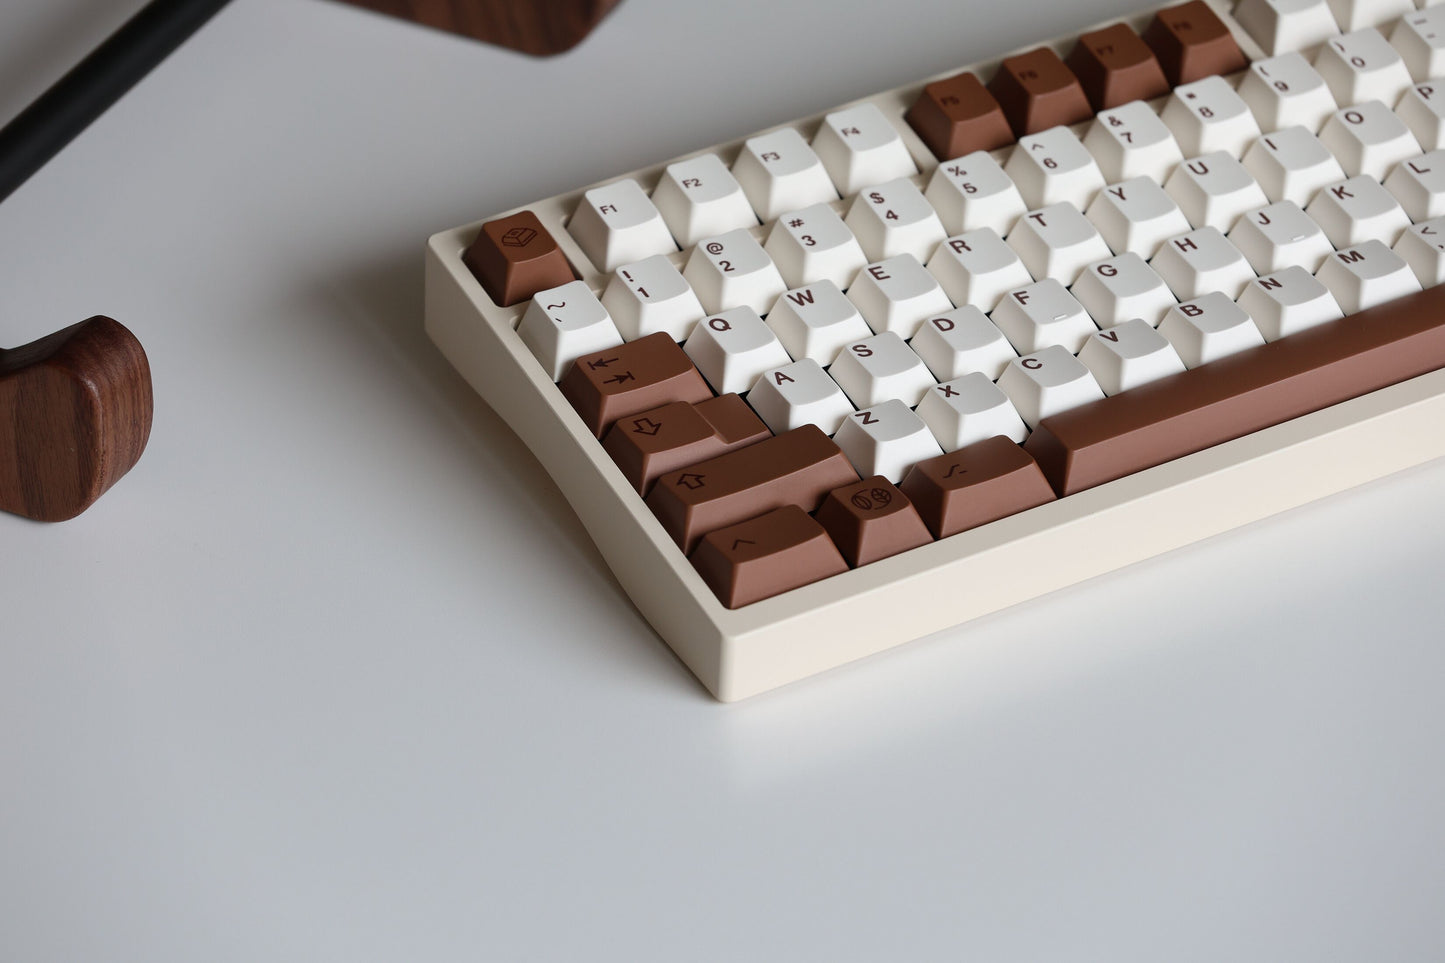 COCOA PBT CHERRY KEYCAPS SET (FREE SHIPPING TO SOME COUNTRIES)